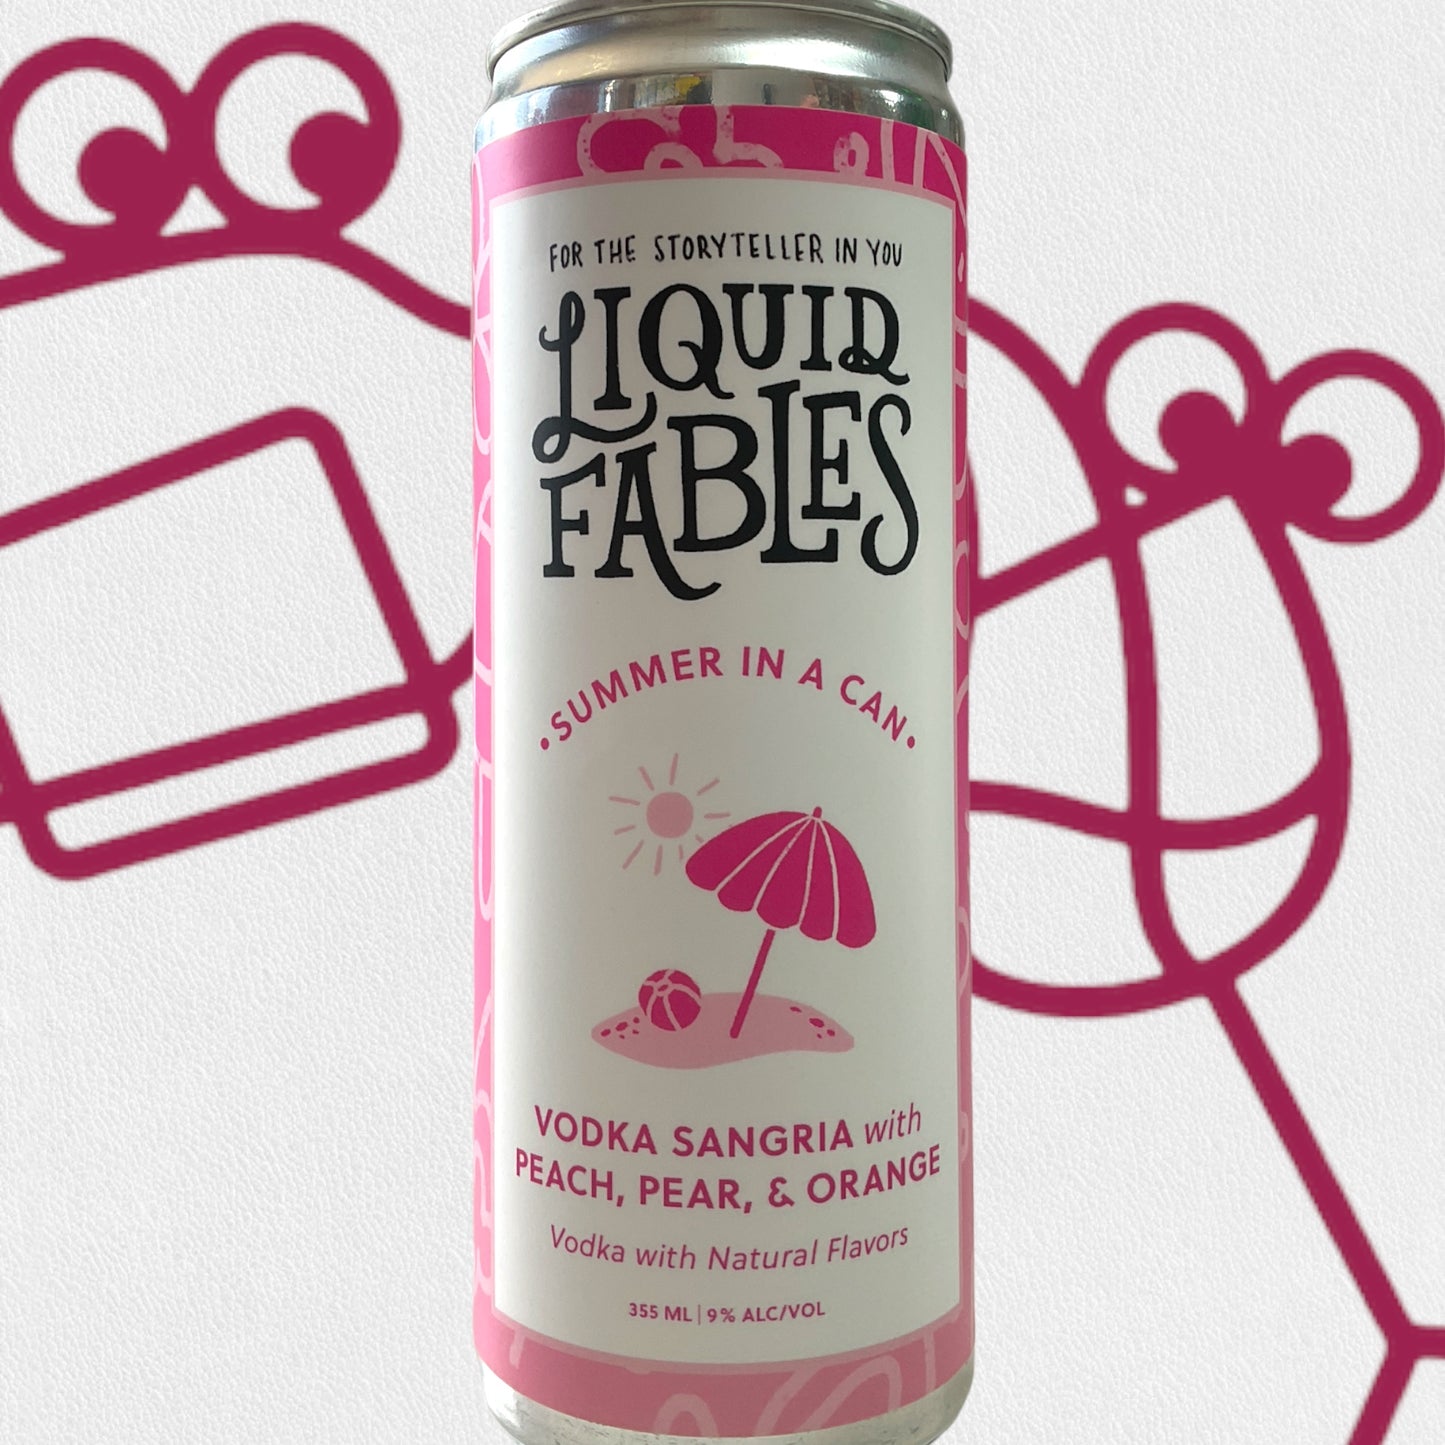 Liquid Fables 'Summer in a Can' Vodka Sangria 4-Pack - Williston Park Wines & Spirits